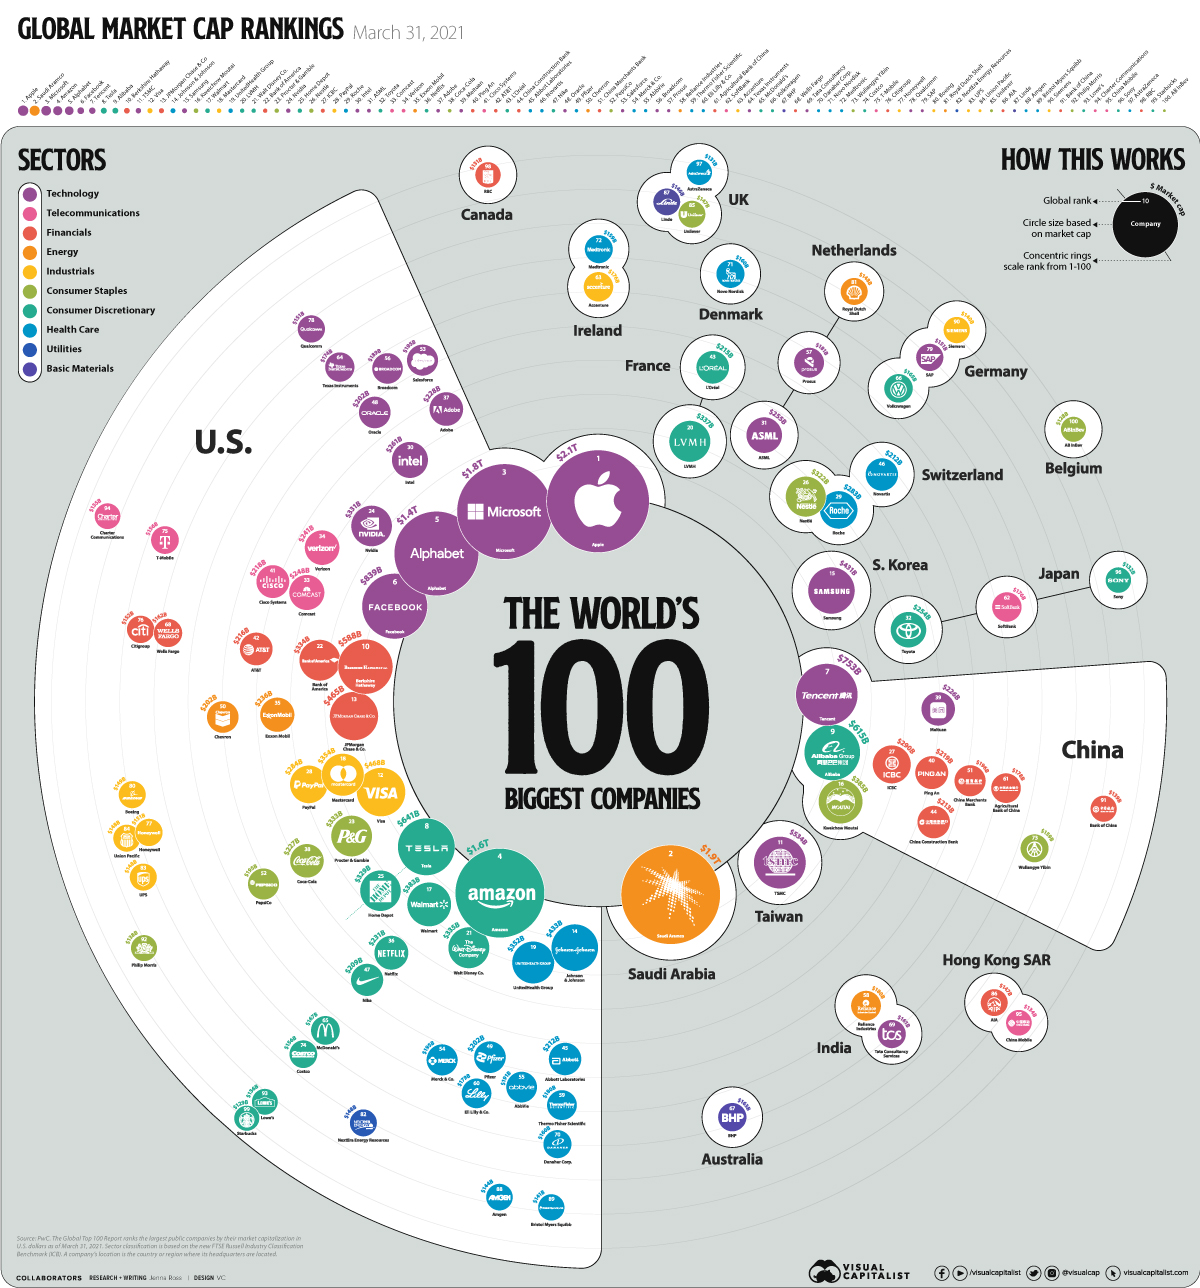 The Biggest Companies in the World based on market capitalisation data from PriceWaterhouseCoopers (PwC), as well as the countries and sectors they are from. Again, note the dominance of software and hardware: Apple, Microsoft, Alphabet (that’s Google), Facebook and Amazon. Visualisation by the visualcapitalist.com at The Biggest Companies in the World in 2021 (Ross 2021)